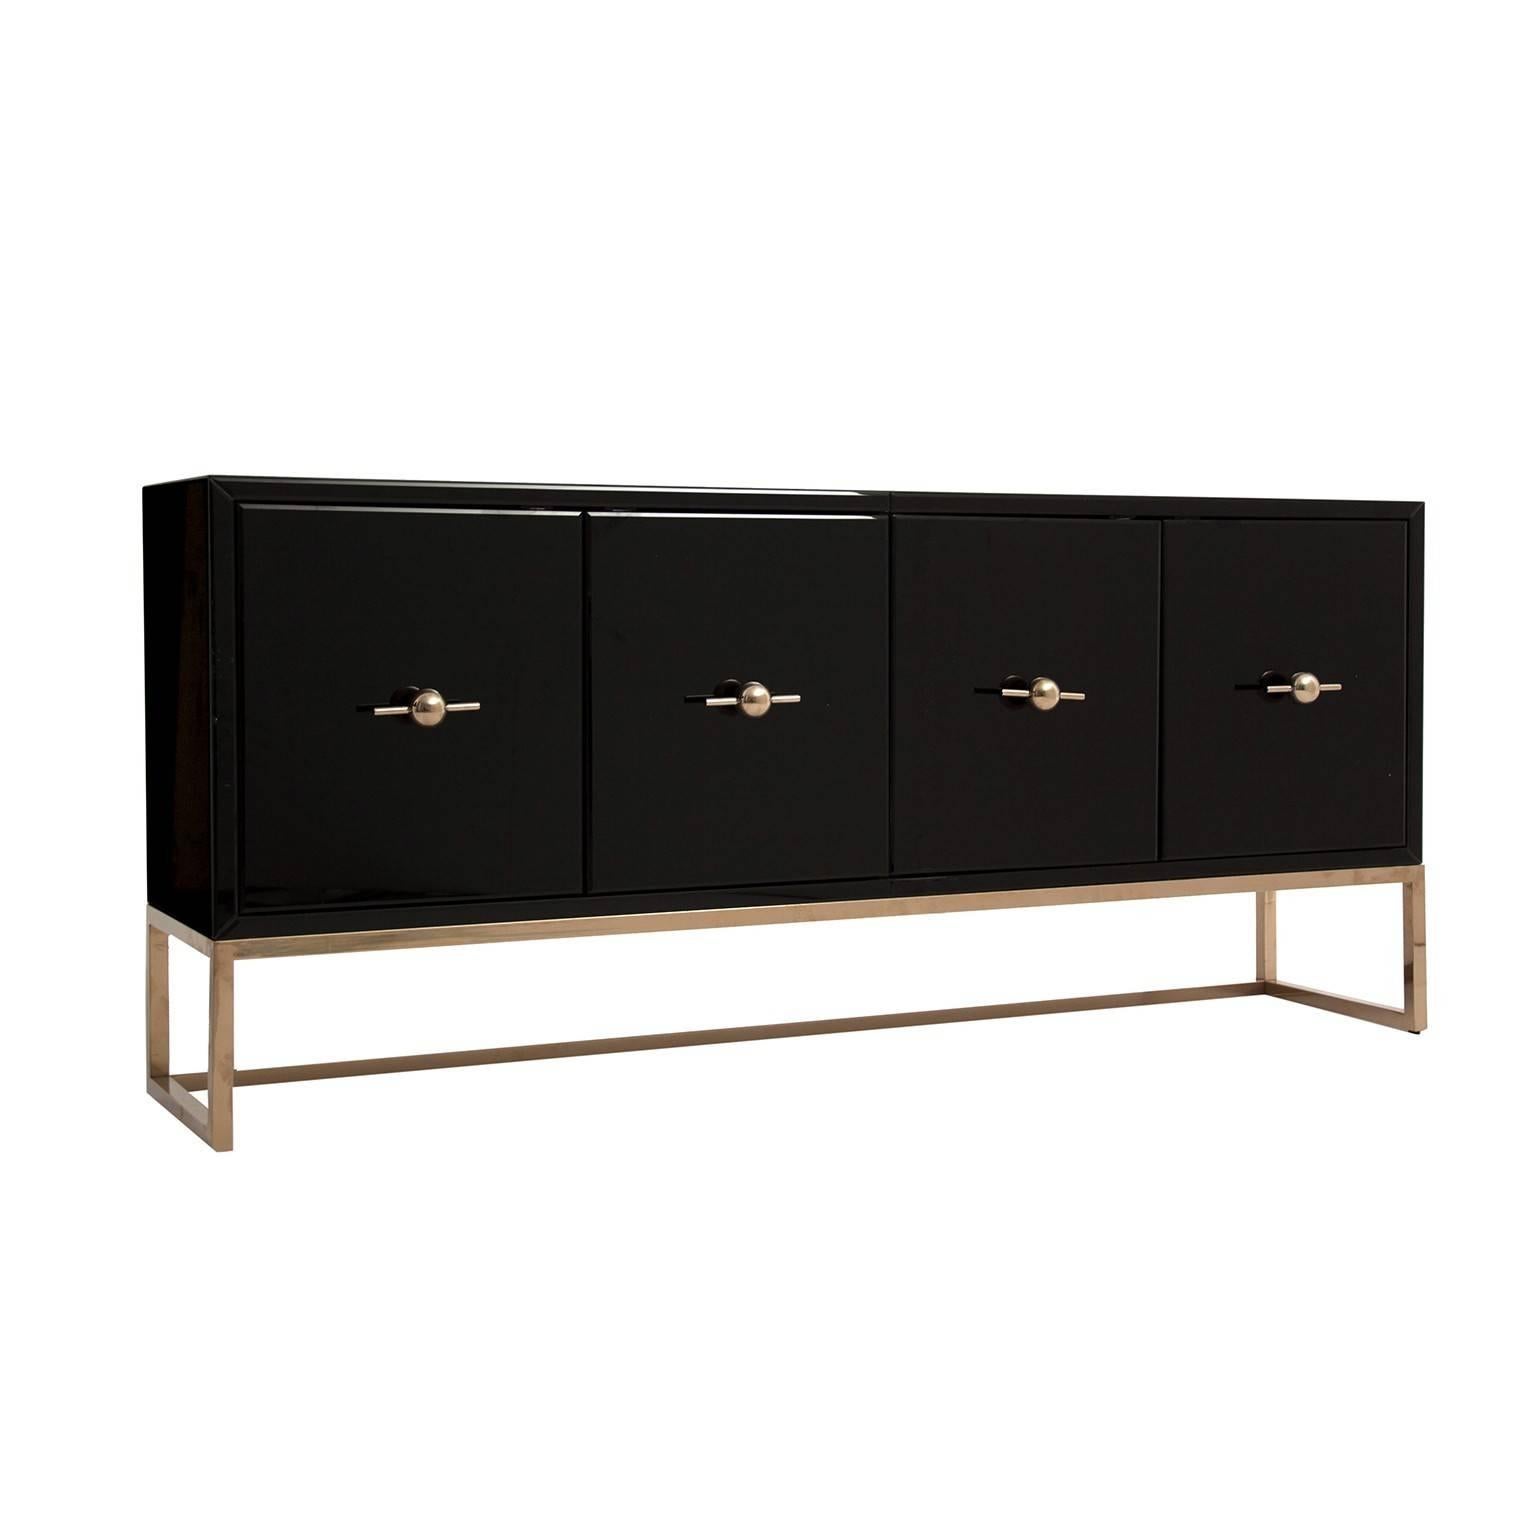 Black lacquered mirror and brass sideboard in Art Deco style. Subtle work of the brass handles and Minimalist lines of the structure. Sleek design for this masterpiece in excellent state!